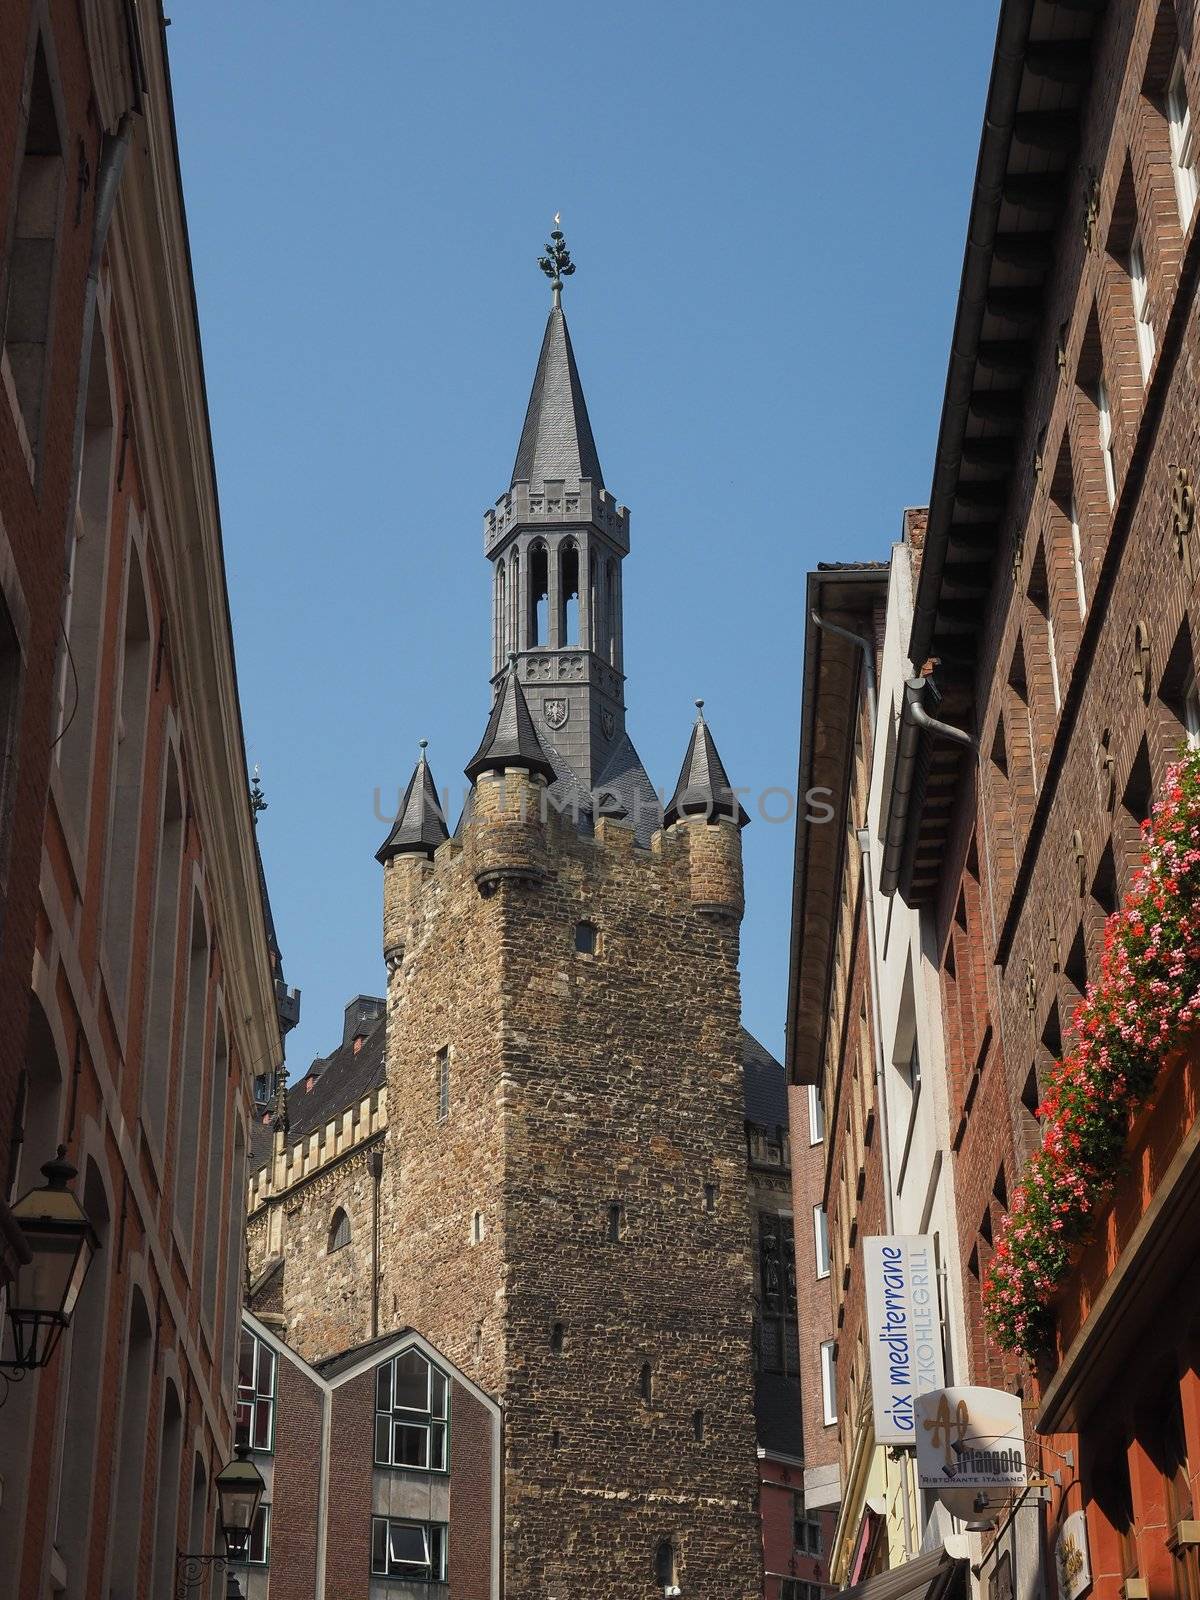 AACHEN, GERMANY - CIRCA AUGUST 2019: Turm der Alte Pfalzanlage (meaning Tower of the Old Palatinate)